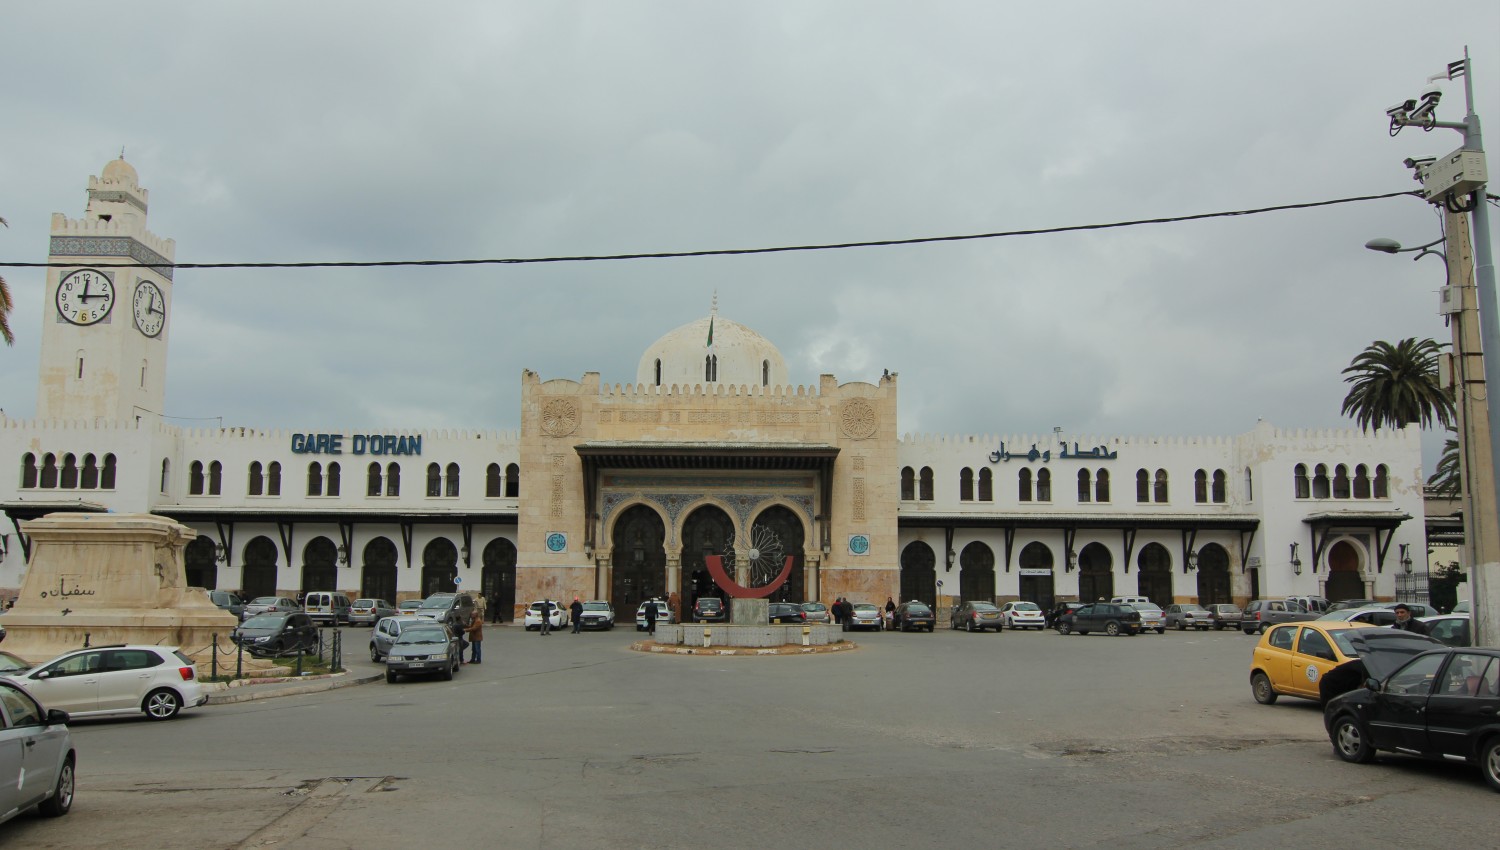 Frontal view of the train station showing the main entrance and minaret-style clock tower